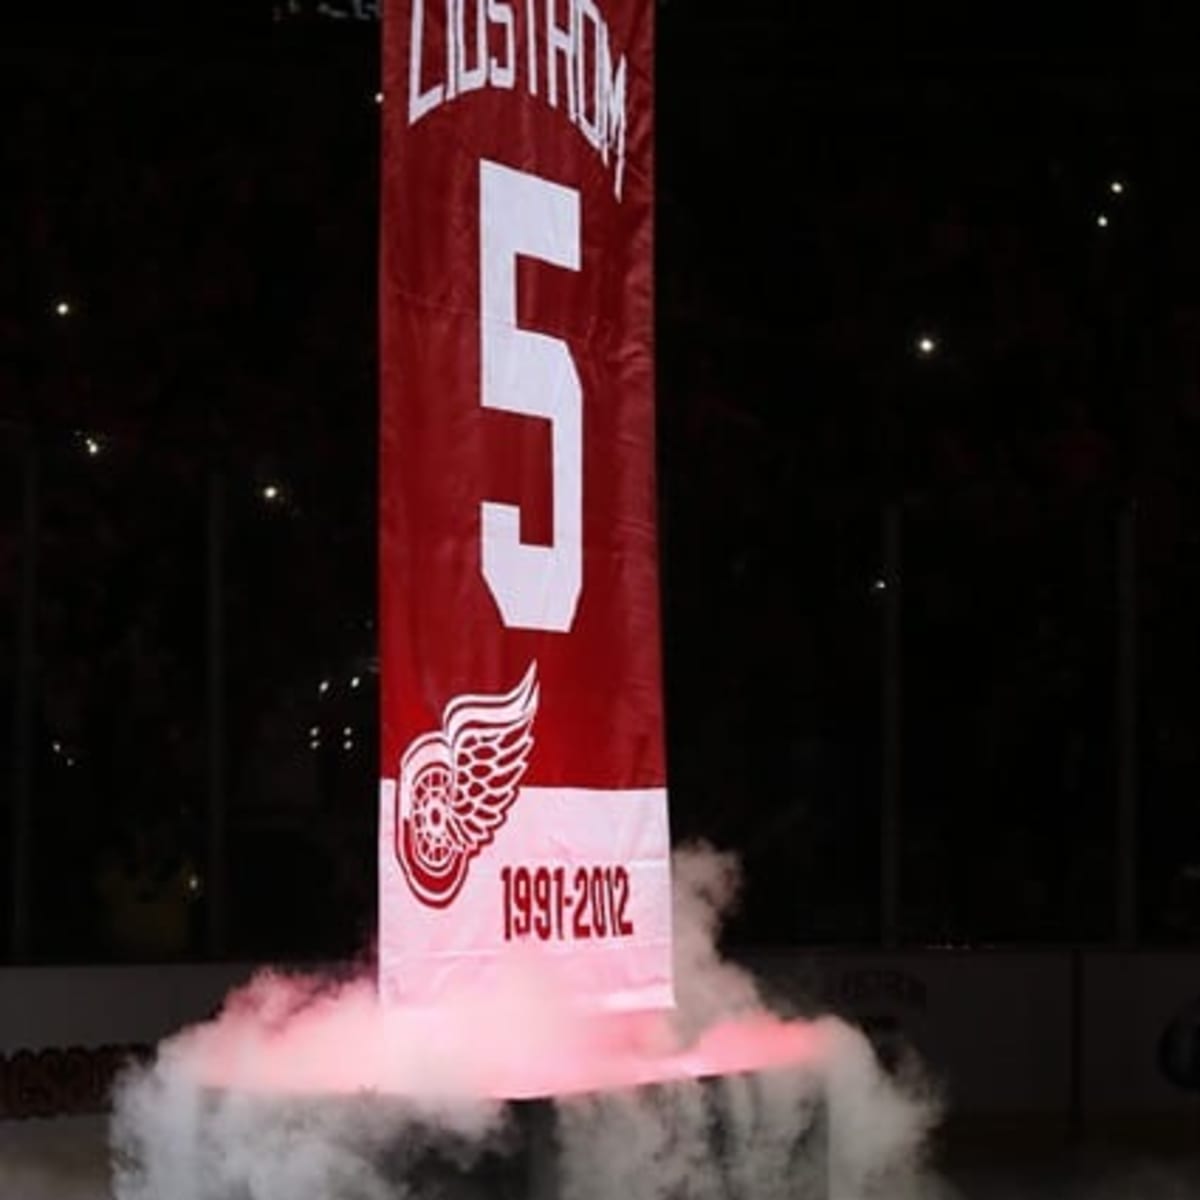 Nick Lidstrom Retires from the Red Wings